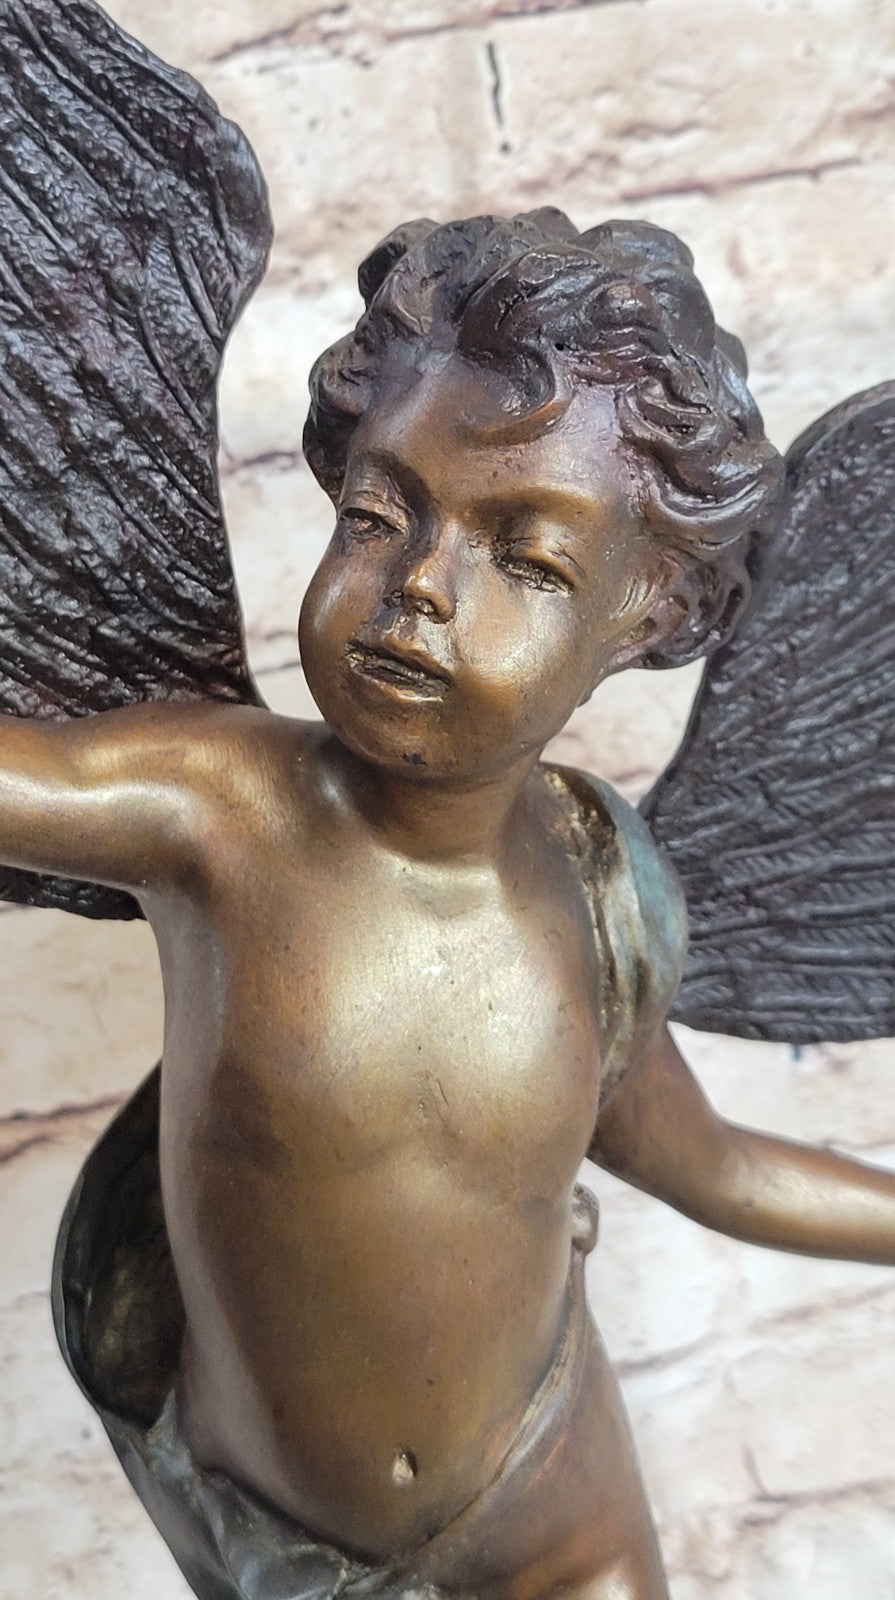 SIGNED VALENTINE DAY CUPID BRONZE SCULPTURE STATUE ON MARBLE BASE HOT CAST SALE